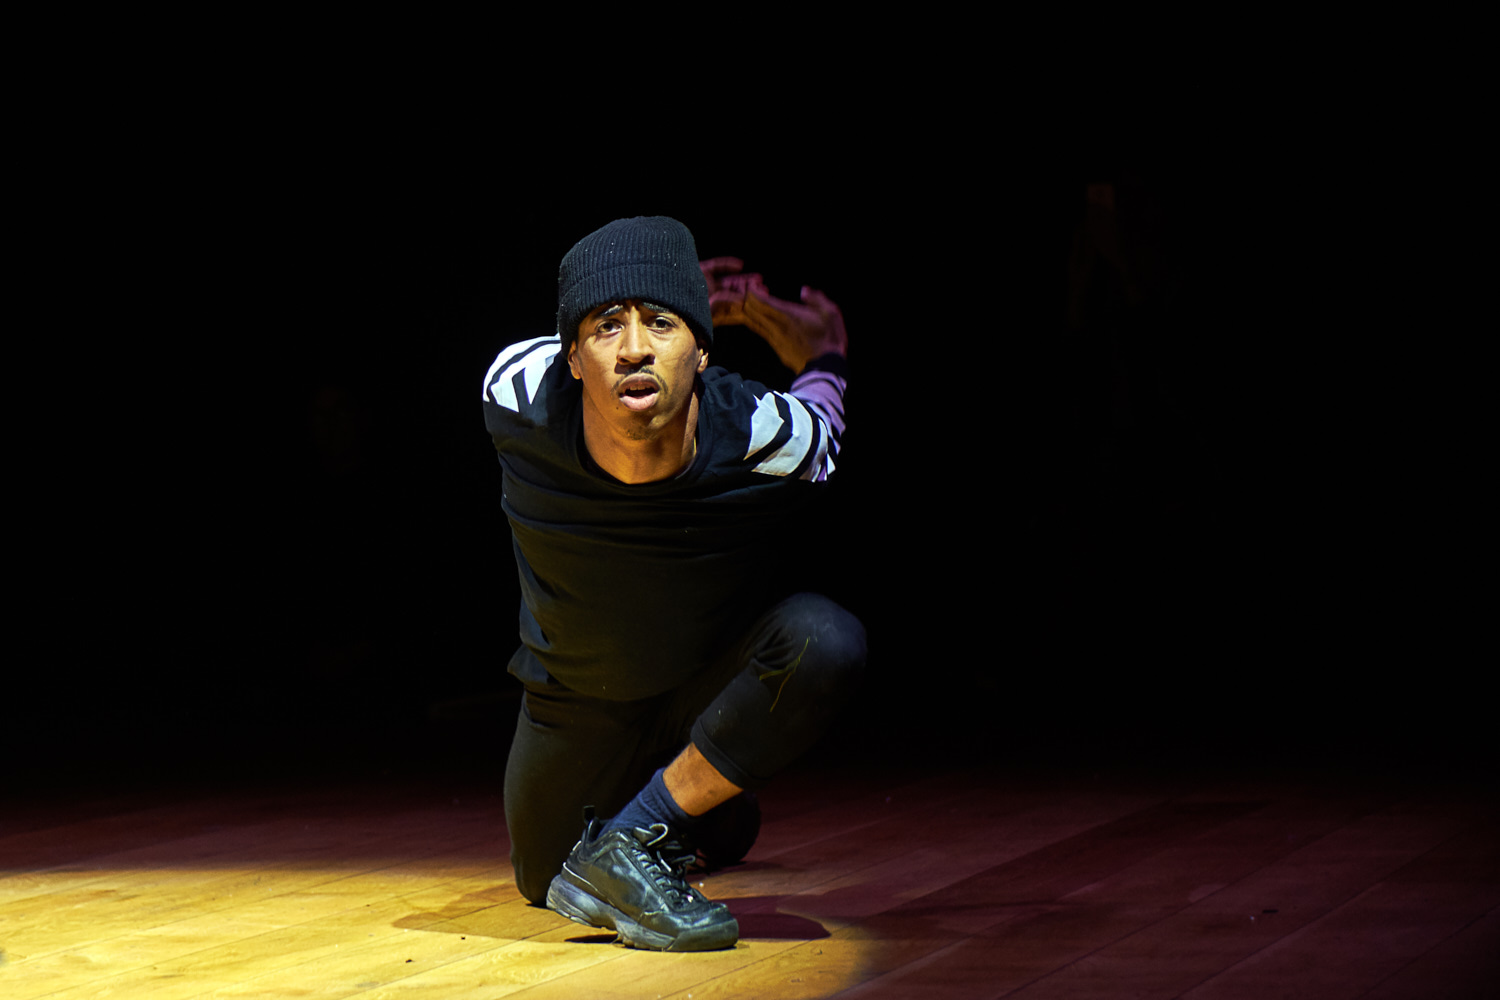 A young performer contorts his body with an earnest expression on his face